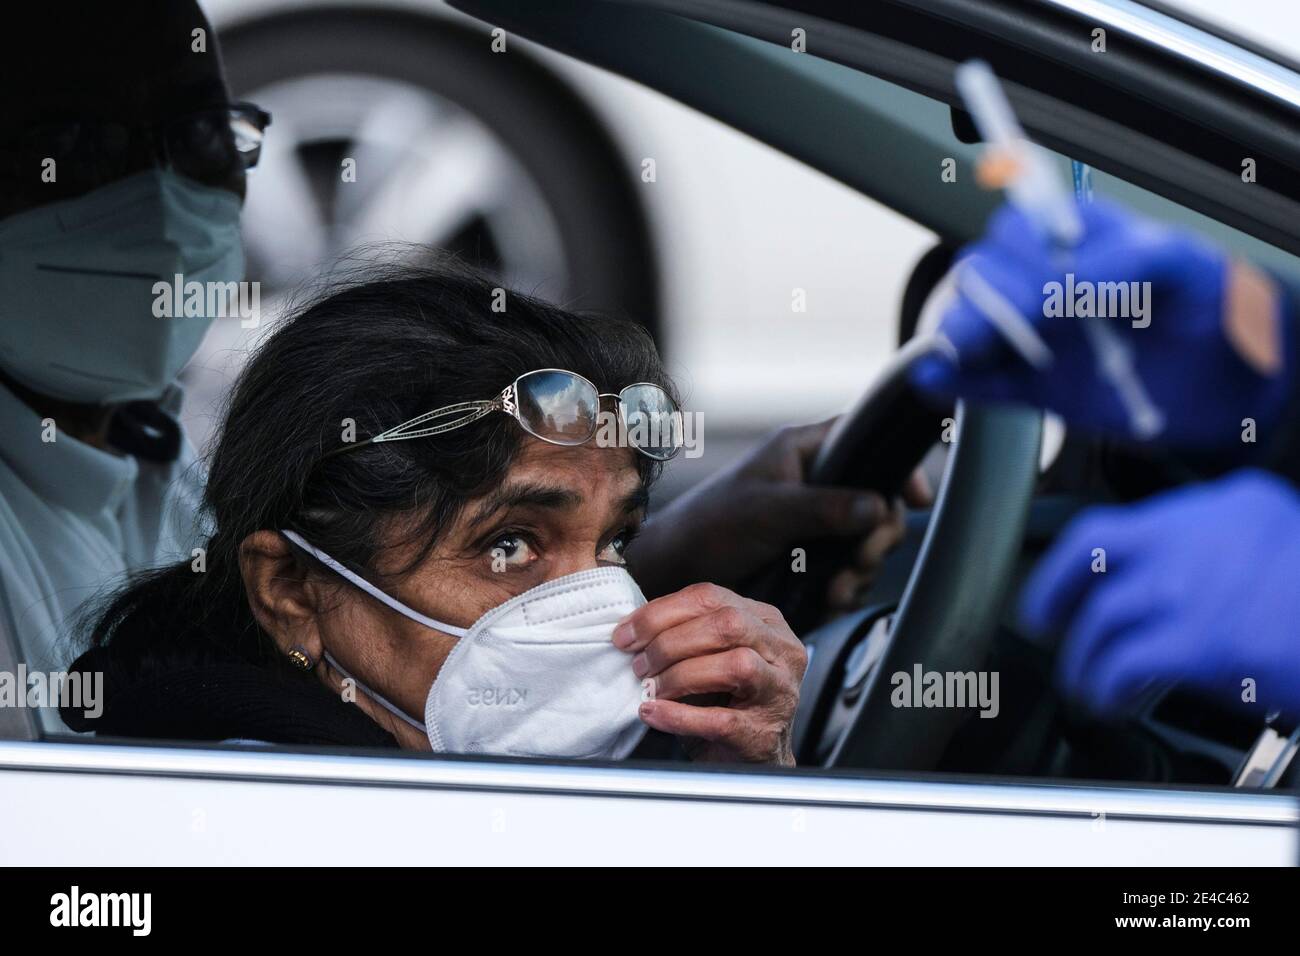 Los Angeles, California, USA. 22nd Jan, 2021. A passenger looks on as a healthcare worker holds a coronavirus vaccine needle in a parking lot at the Pomona Fairplex. Credit: Ringo Chiu/ZUMA Wire/Alamy Live News Stock Photo